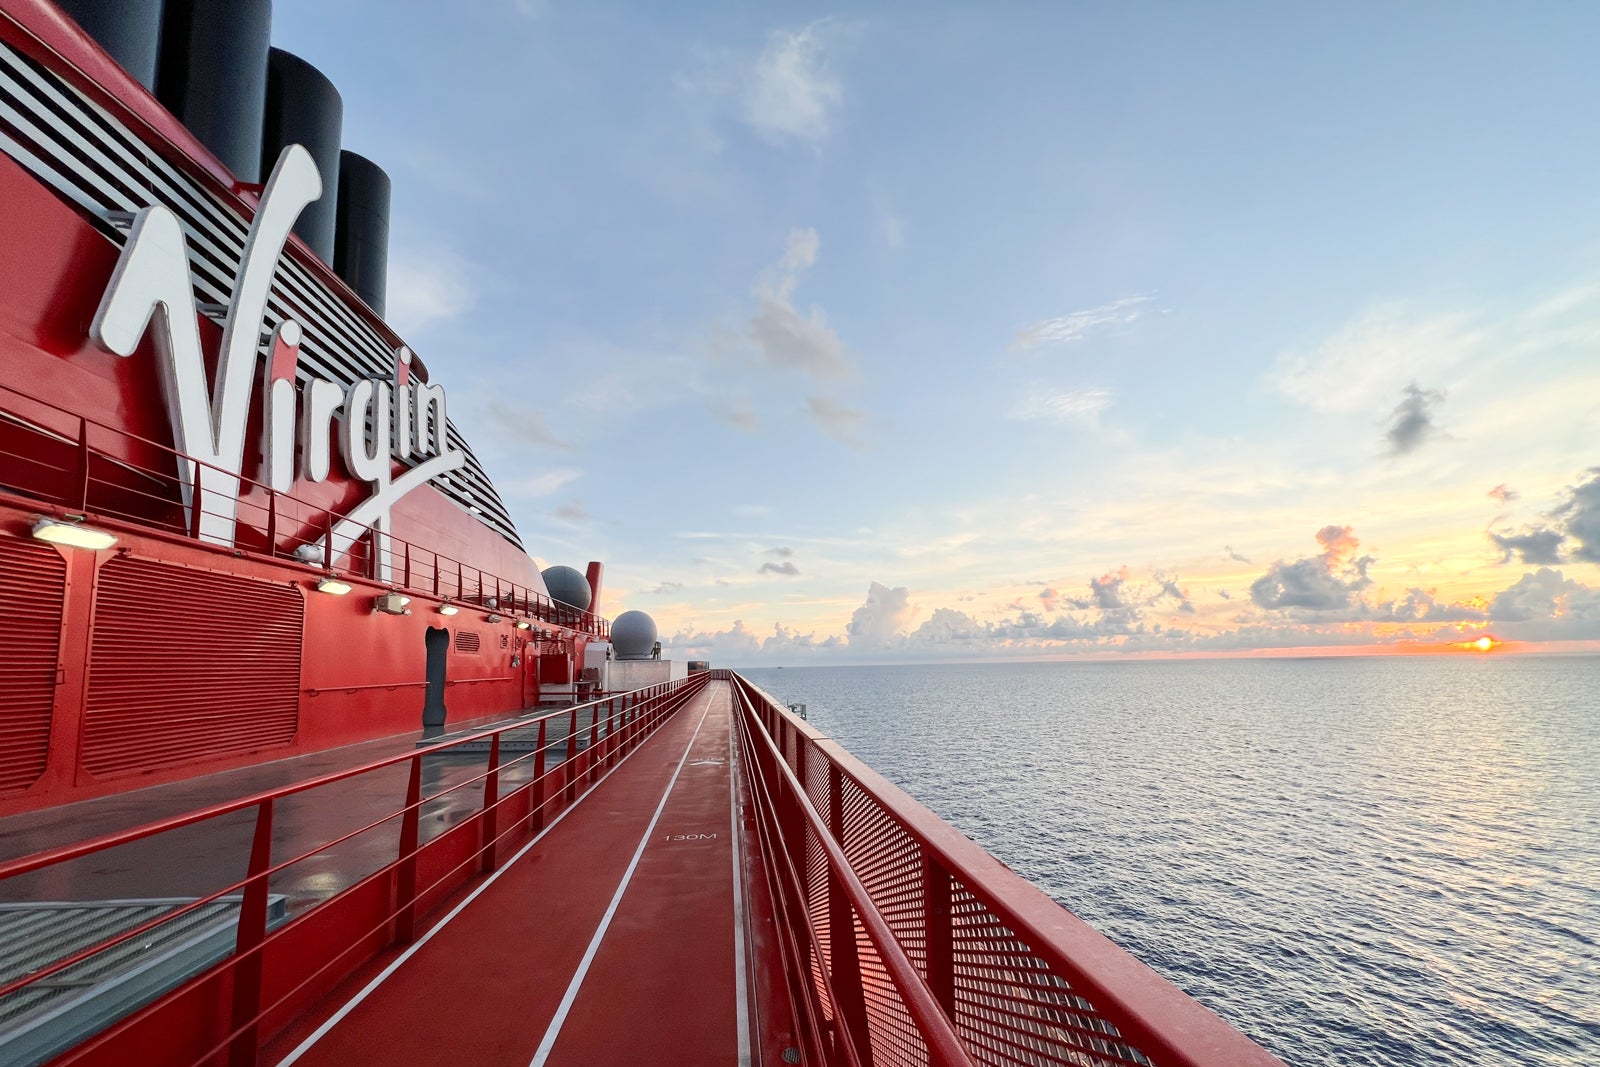 Virgin Voyages Sailing Club loyalty program: Everything you need to know